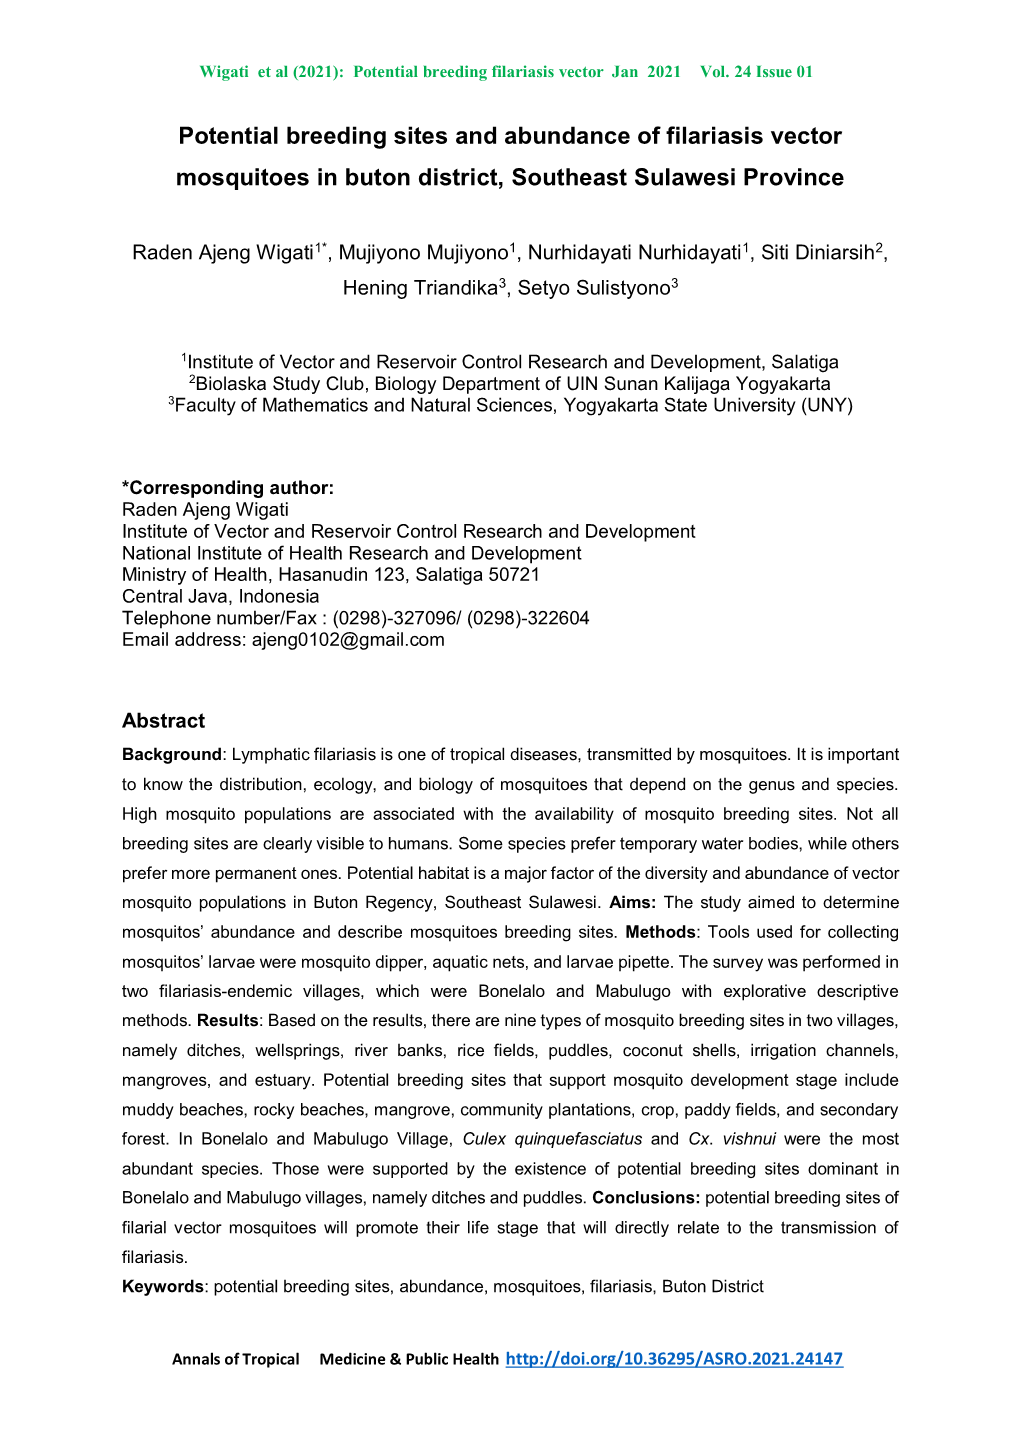 Potential Breeding Sites and Abundance of Filariasis Vector Mosquitoes in Buton District, Southeast Sulawesi Province